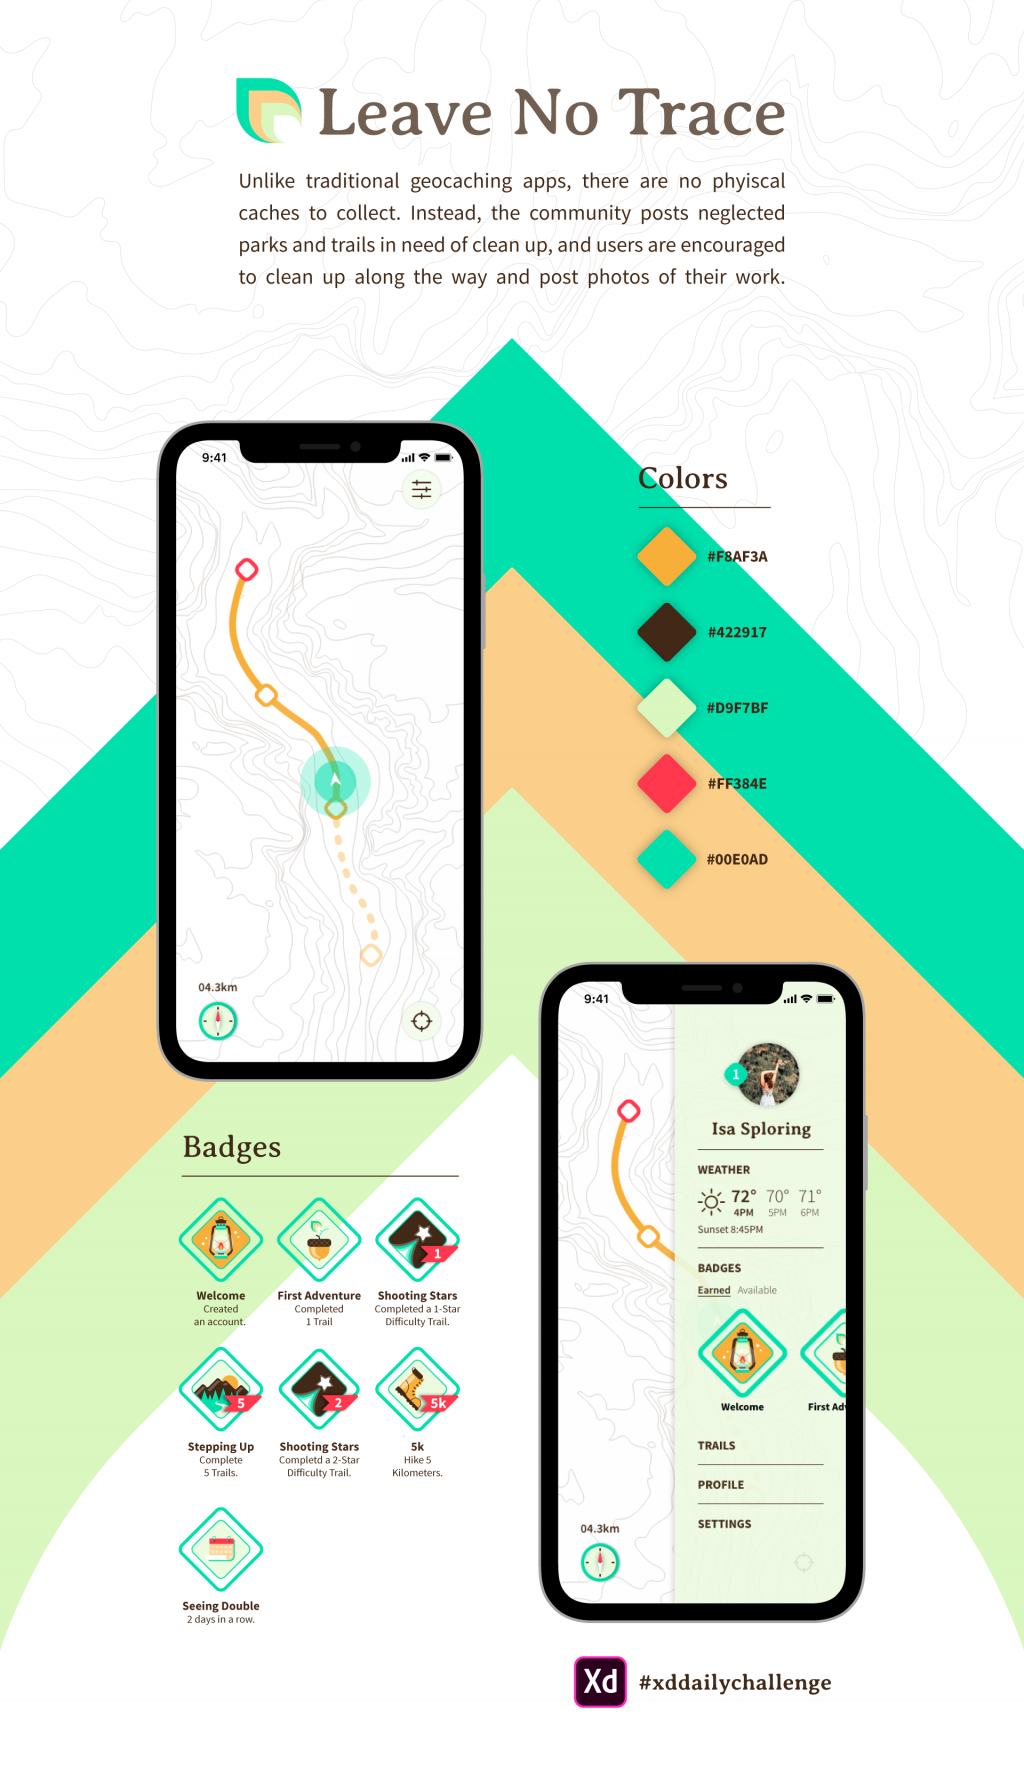 Mockup for a design for a geocaching app.